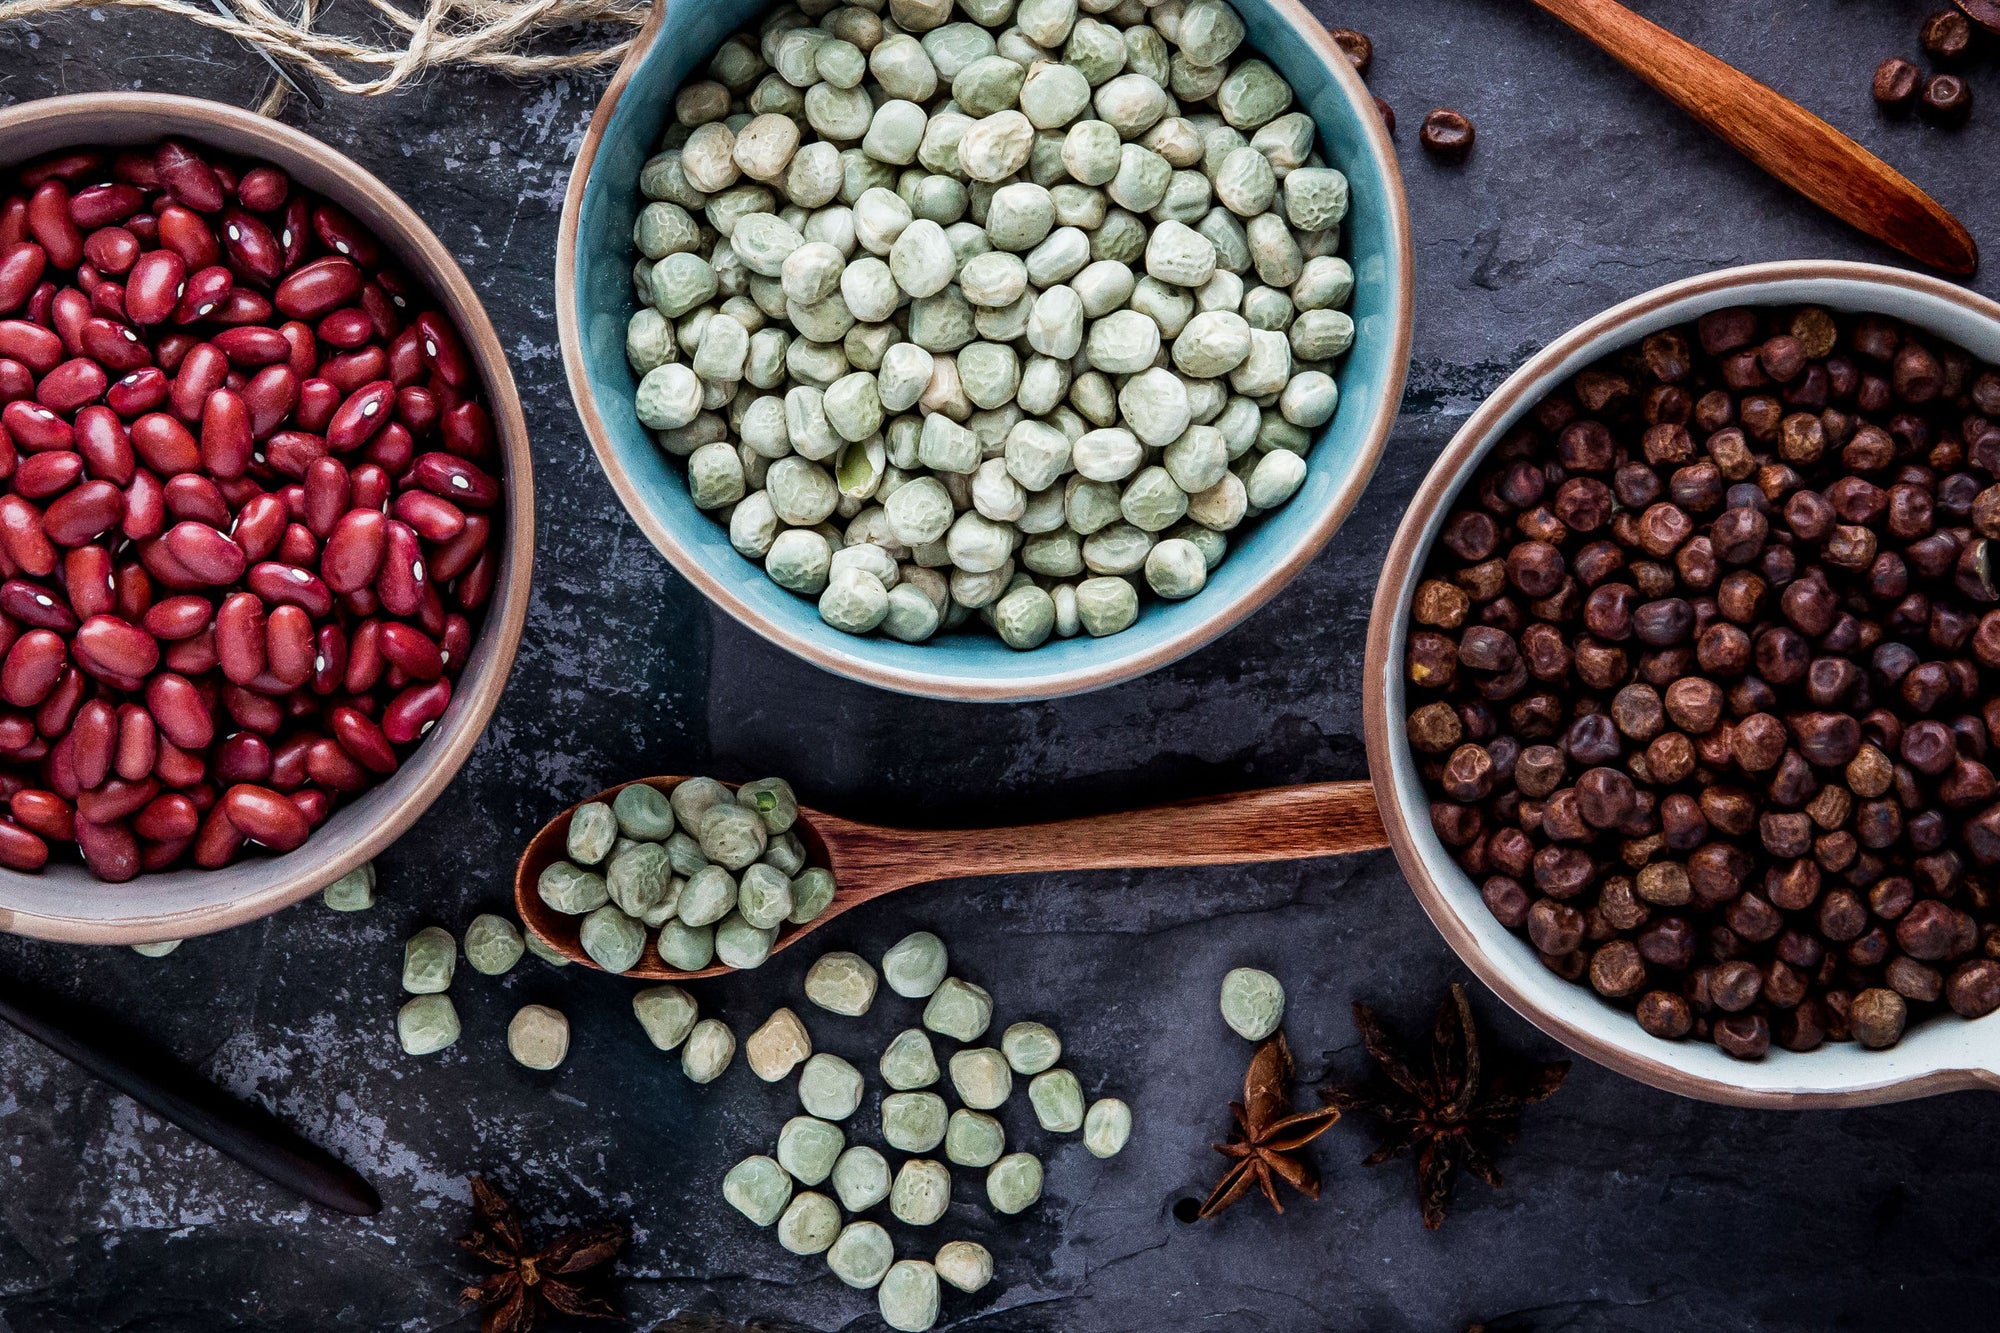 Eat more beans! And peas, lentils, chickpeas…